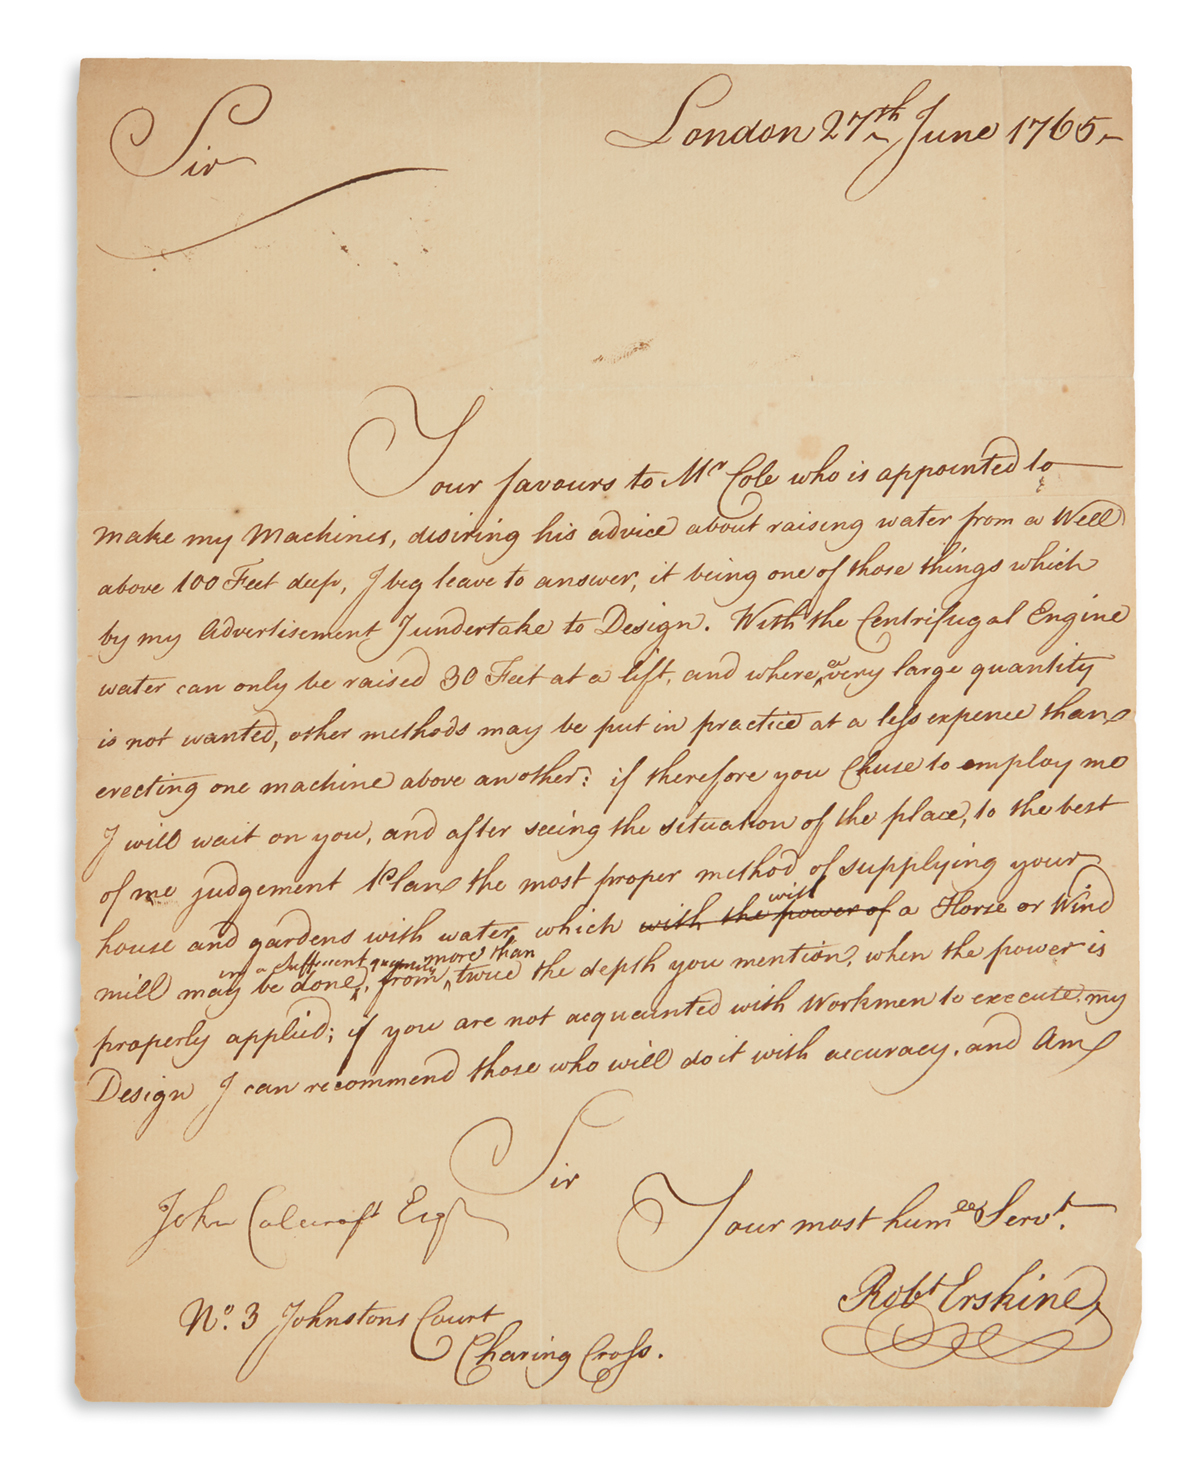 ROBERT ERSKINE. Autograph Letter Signed, RobtErskine, to John Calecroft, offering to design a water pump for...